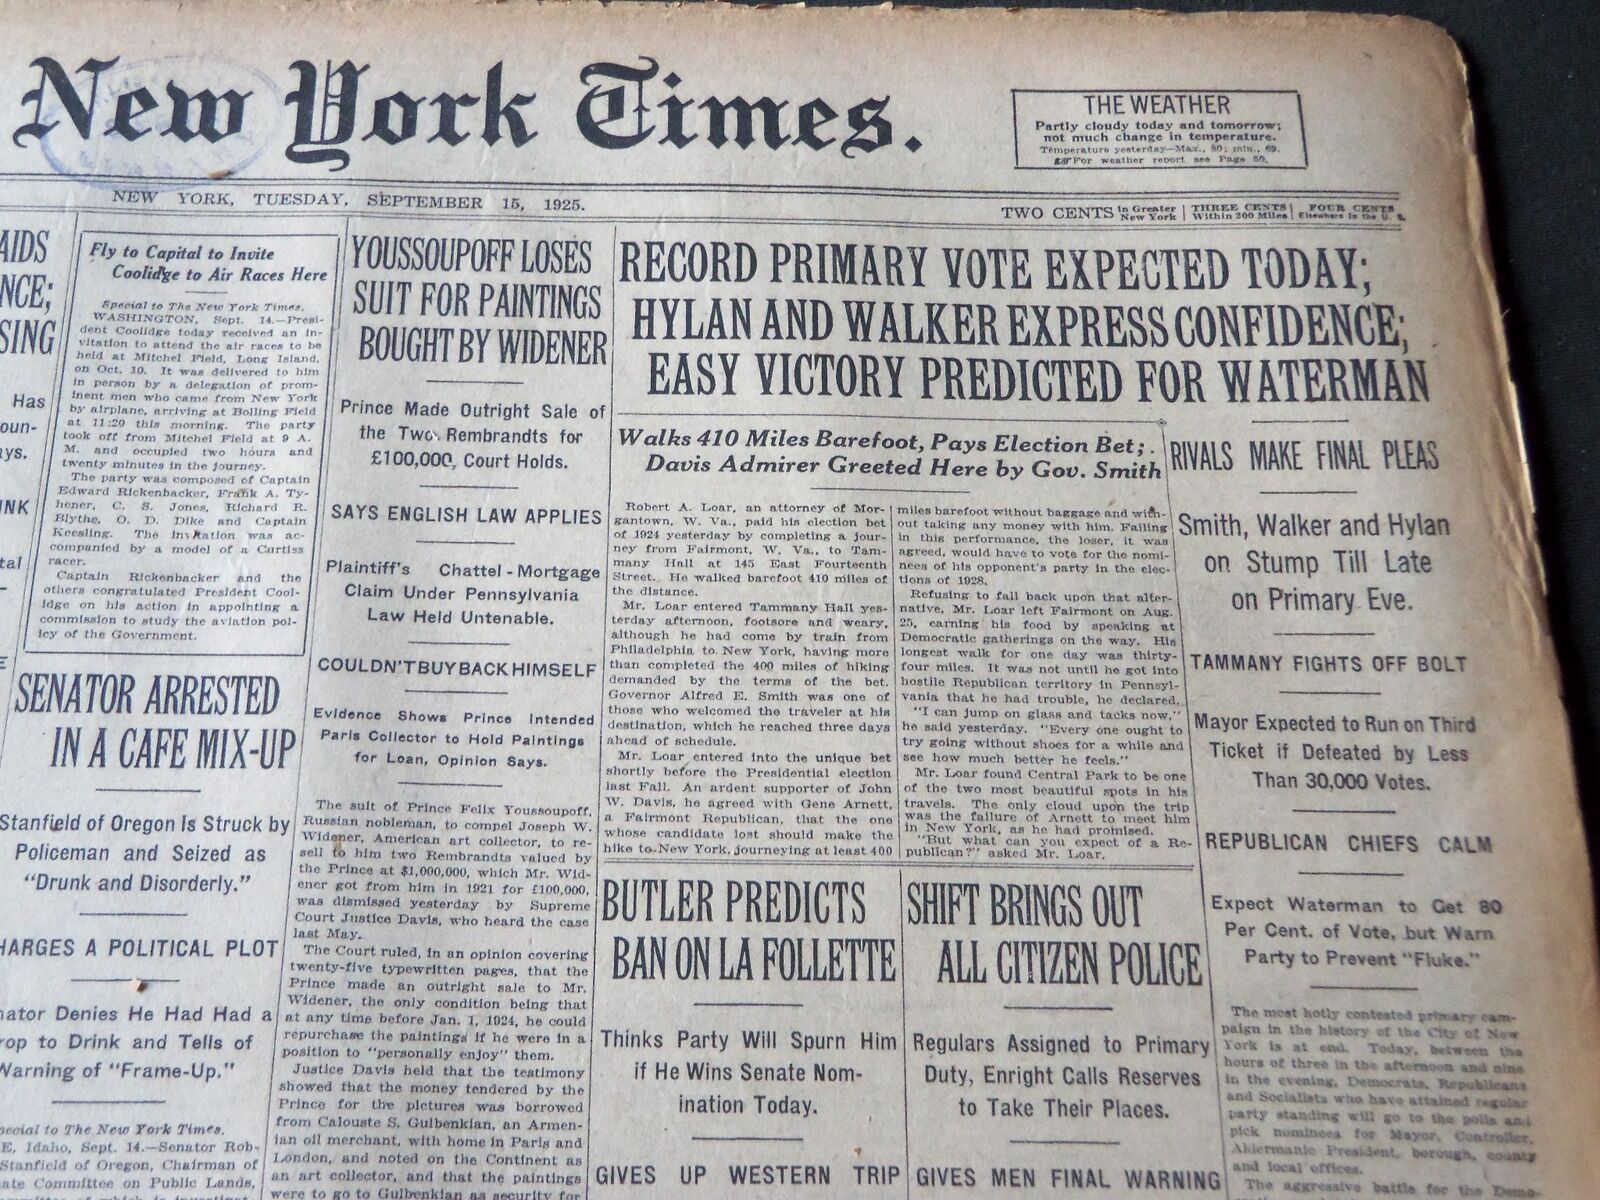 1925 SEPTEMBER 15 NEW YORK TIMES - RECORD PRIMARY VOTE EXPECTED TODAY - NT 7182